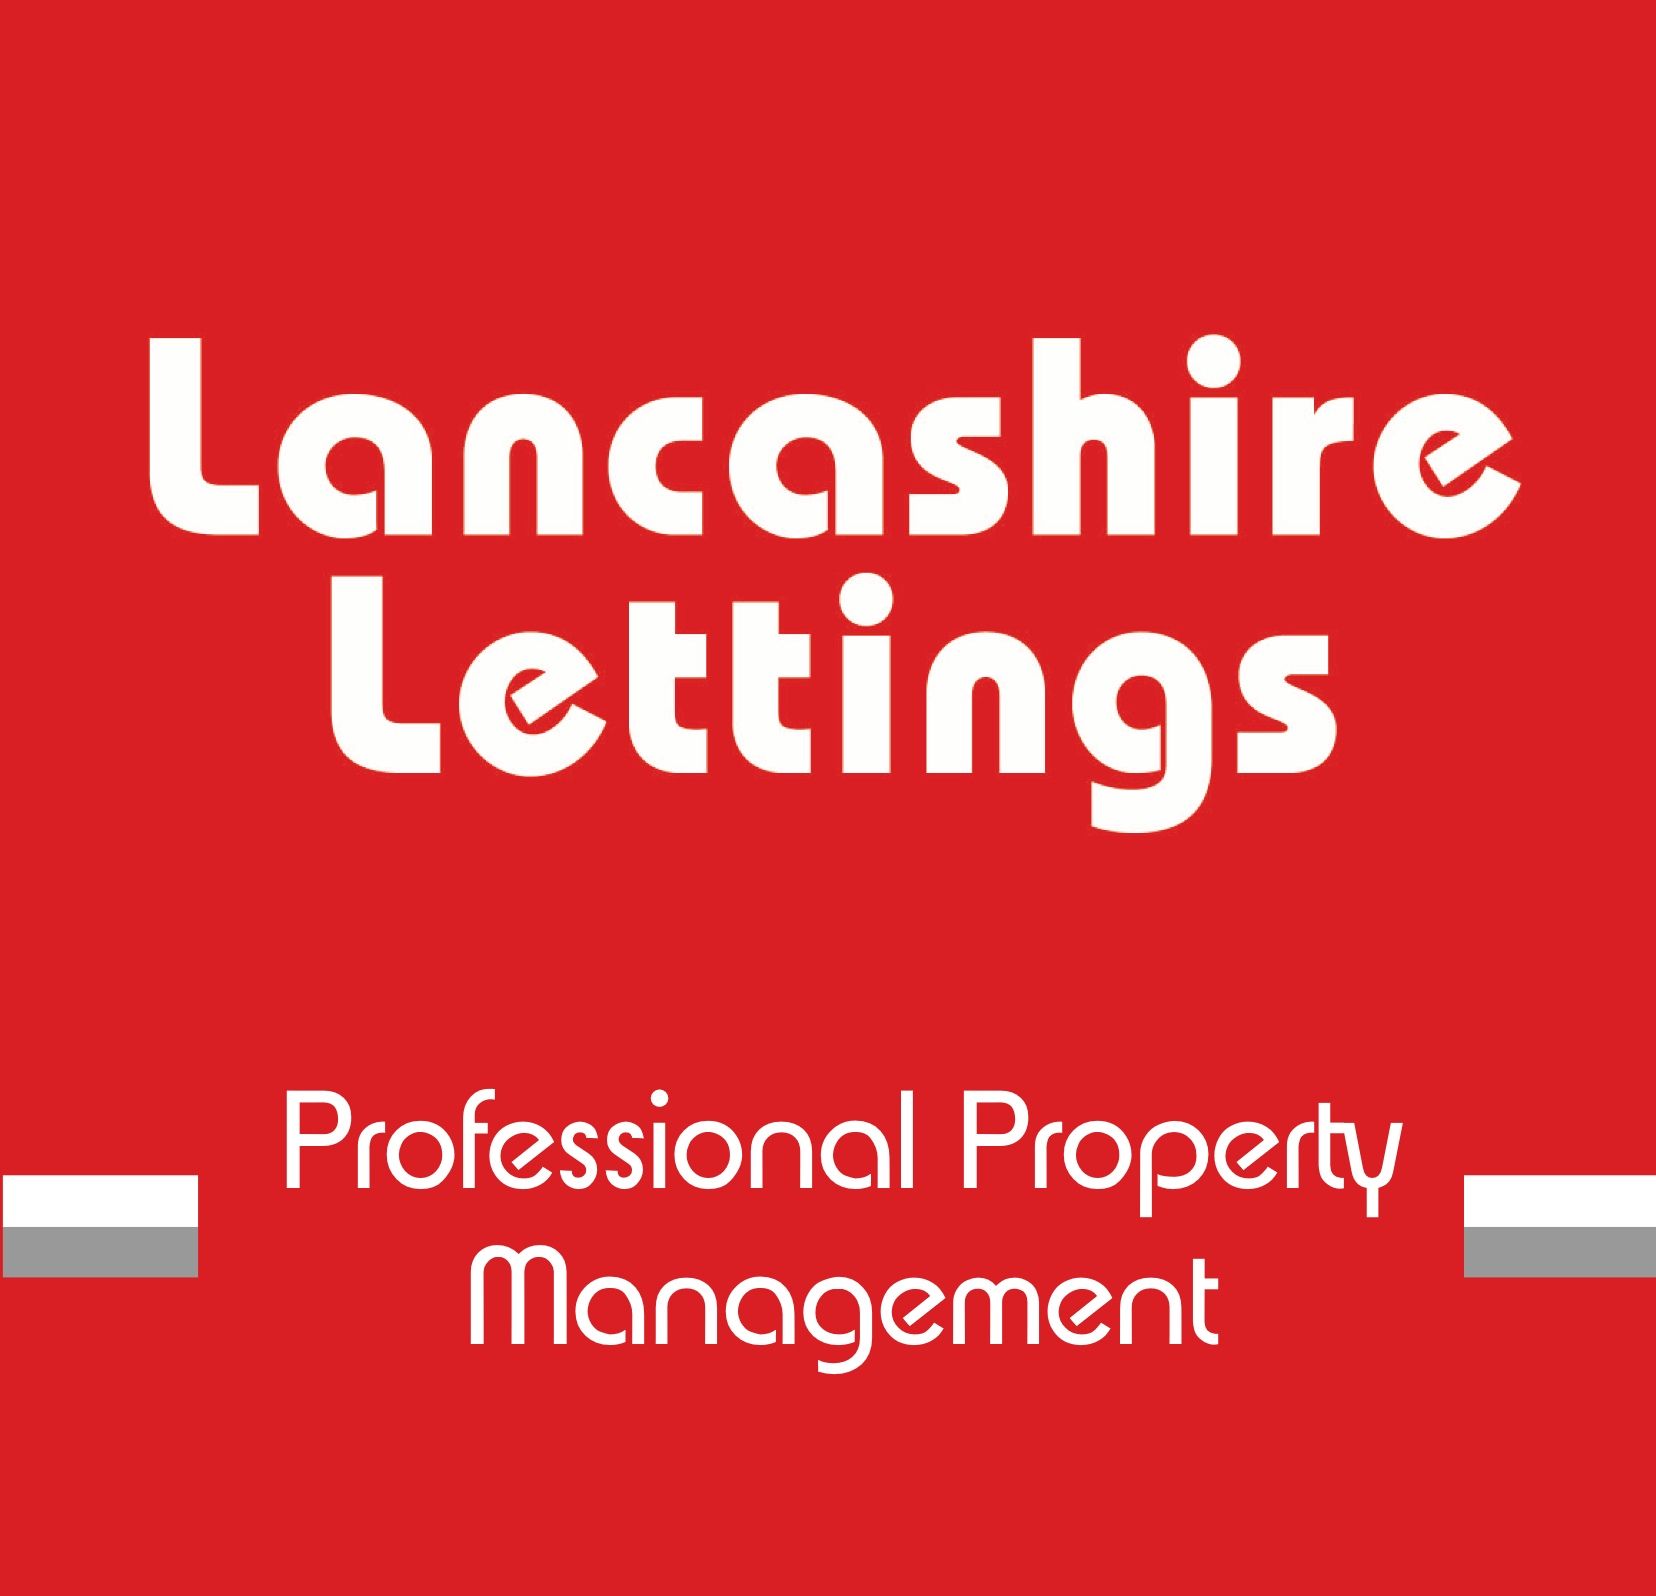 Company logo of Lancashire Lettings set in red rectangle with white and grey lines and white text